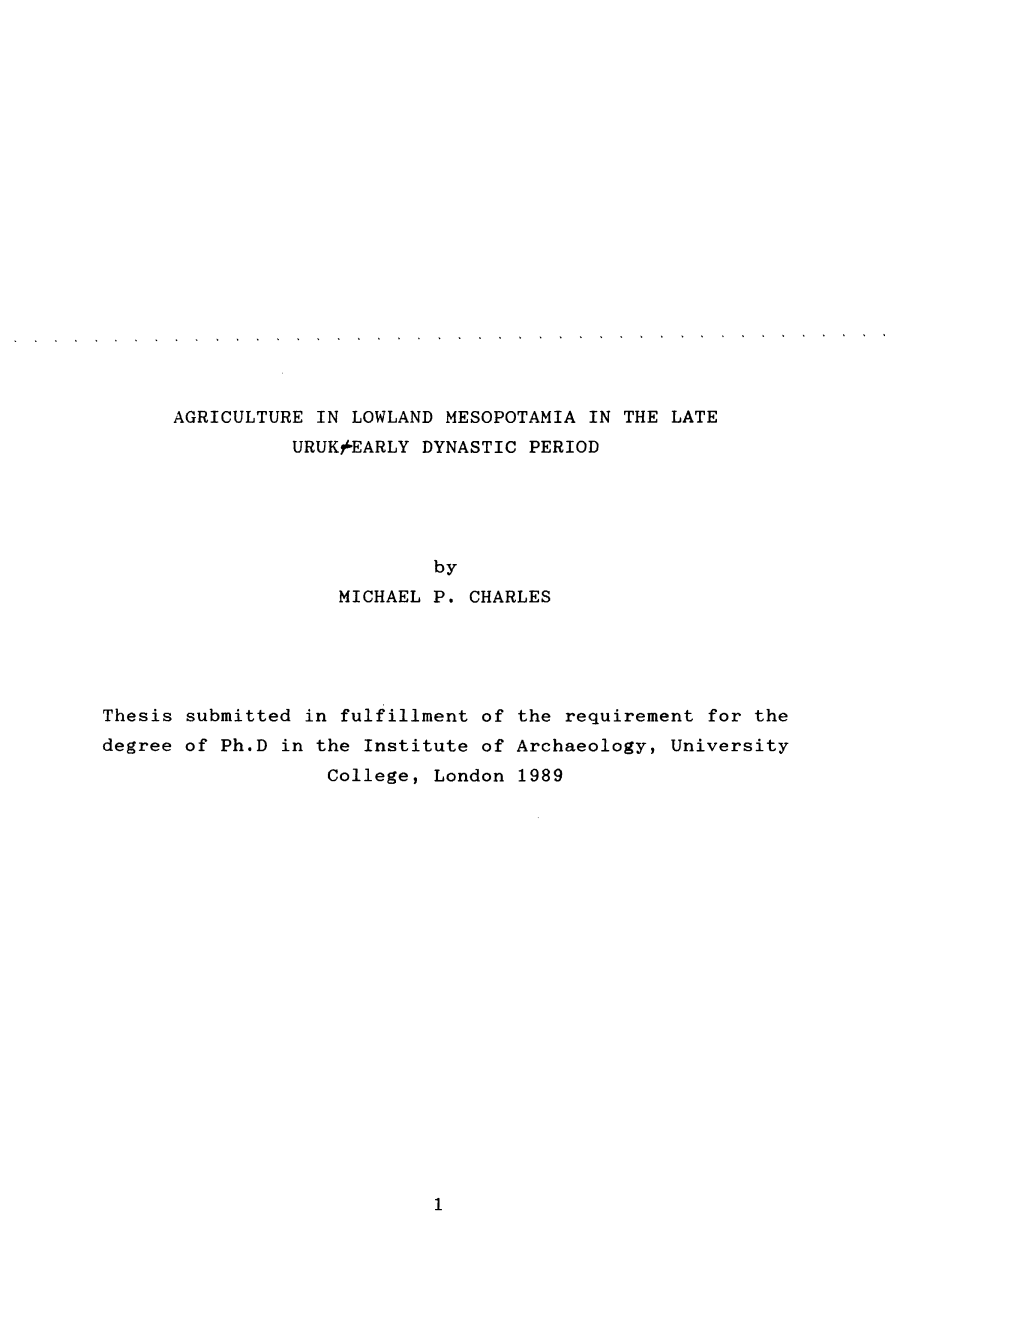 AGRICULTURE in LOWLAND MESOPOTAMIA in the LATE URUK^EARLY DYNASTIC PERIOD by MICHAEL P. CHARLES Thesis Submitted in Fulfillment